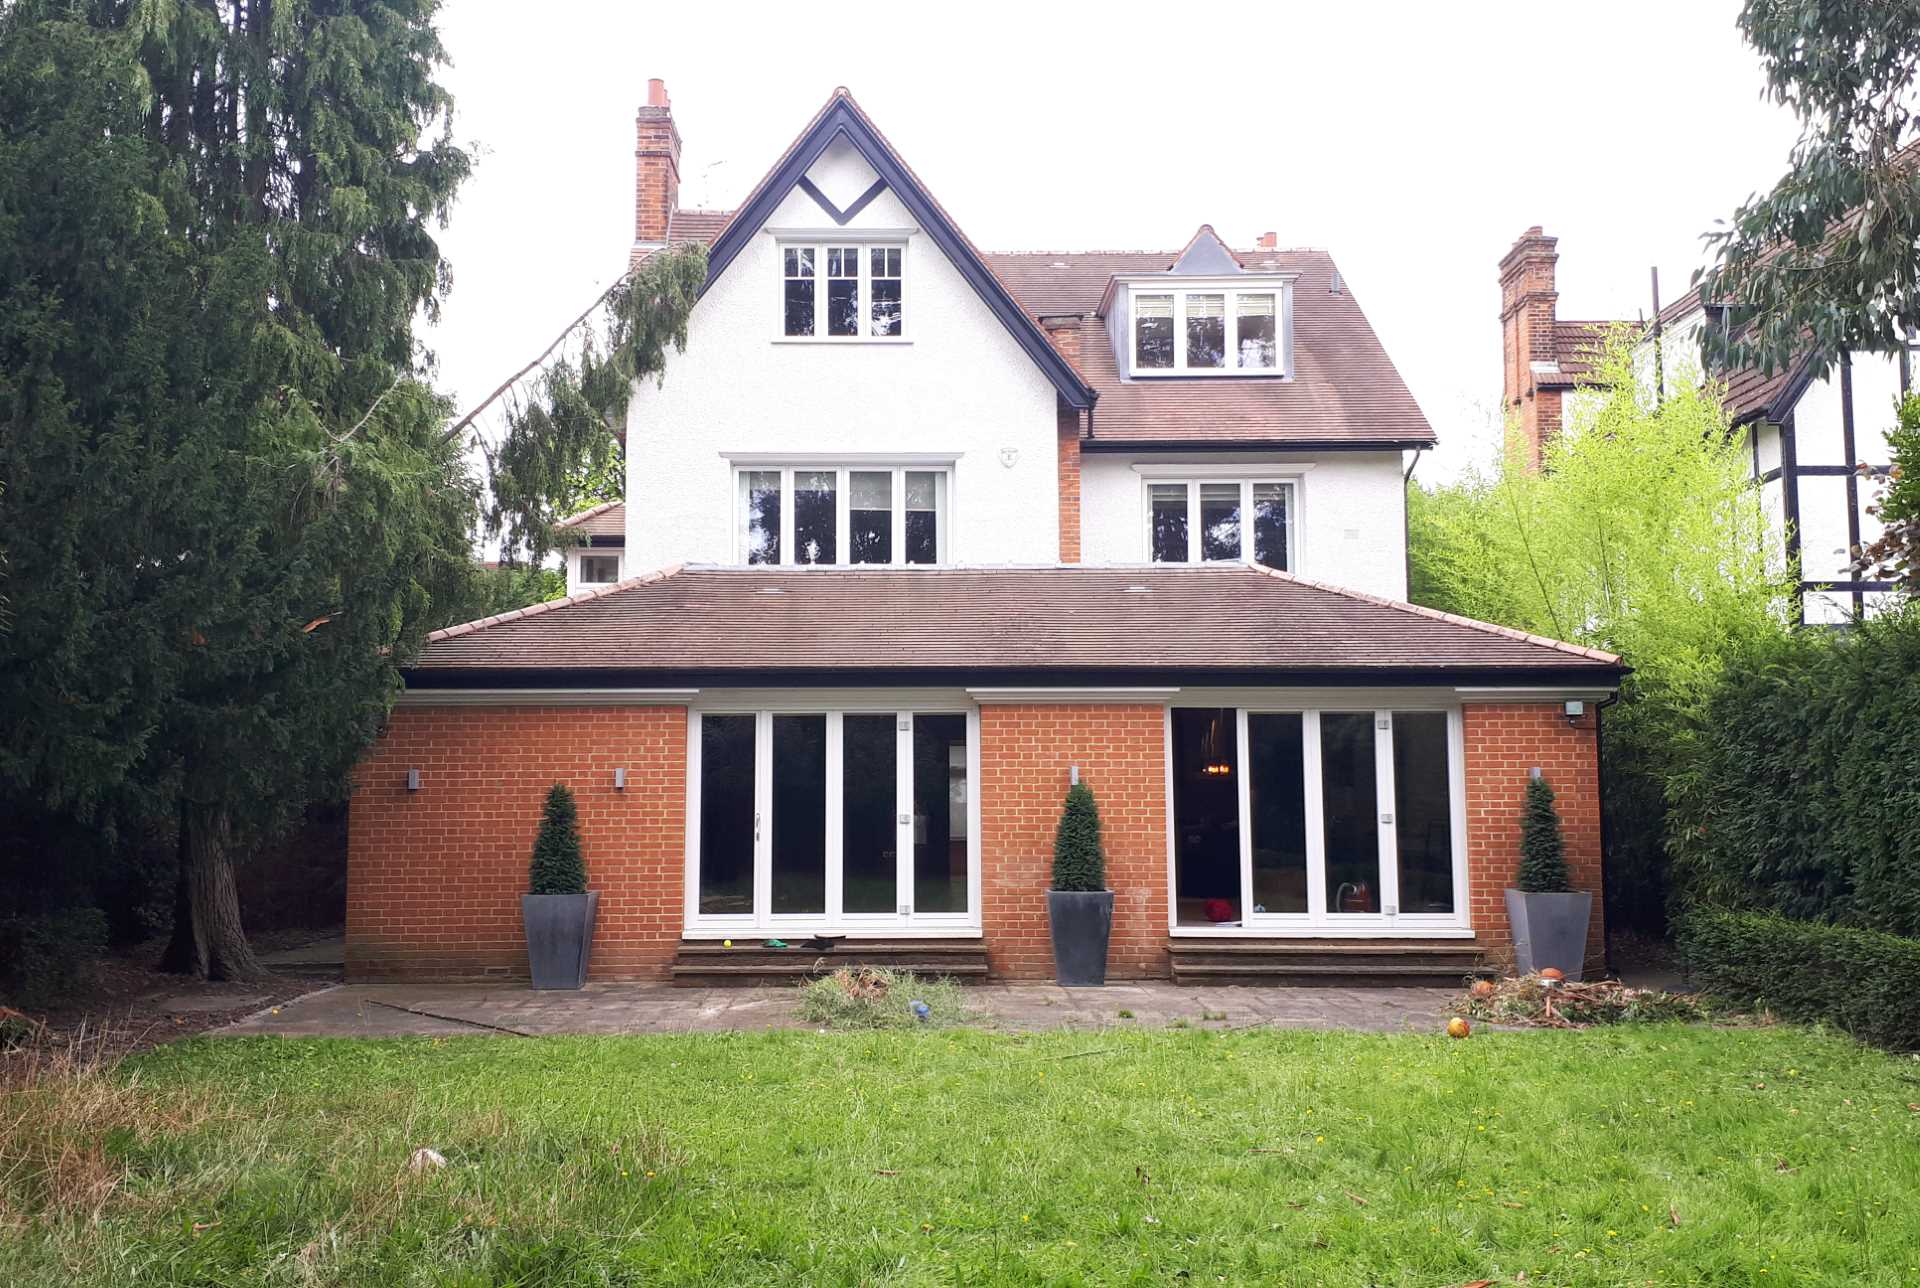 An updated brick extension for an Edwardian home includes a sitting area and dining area for eight people.